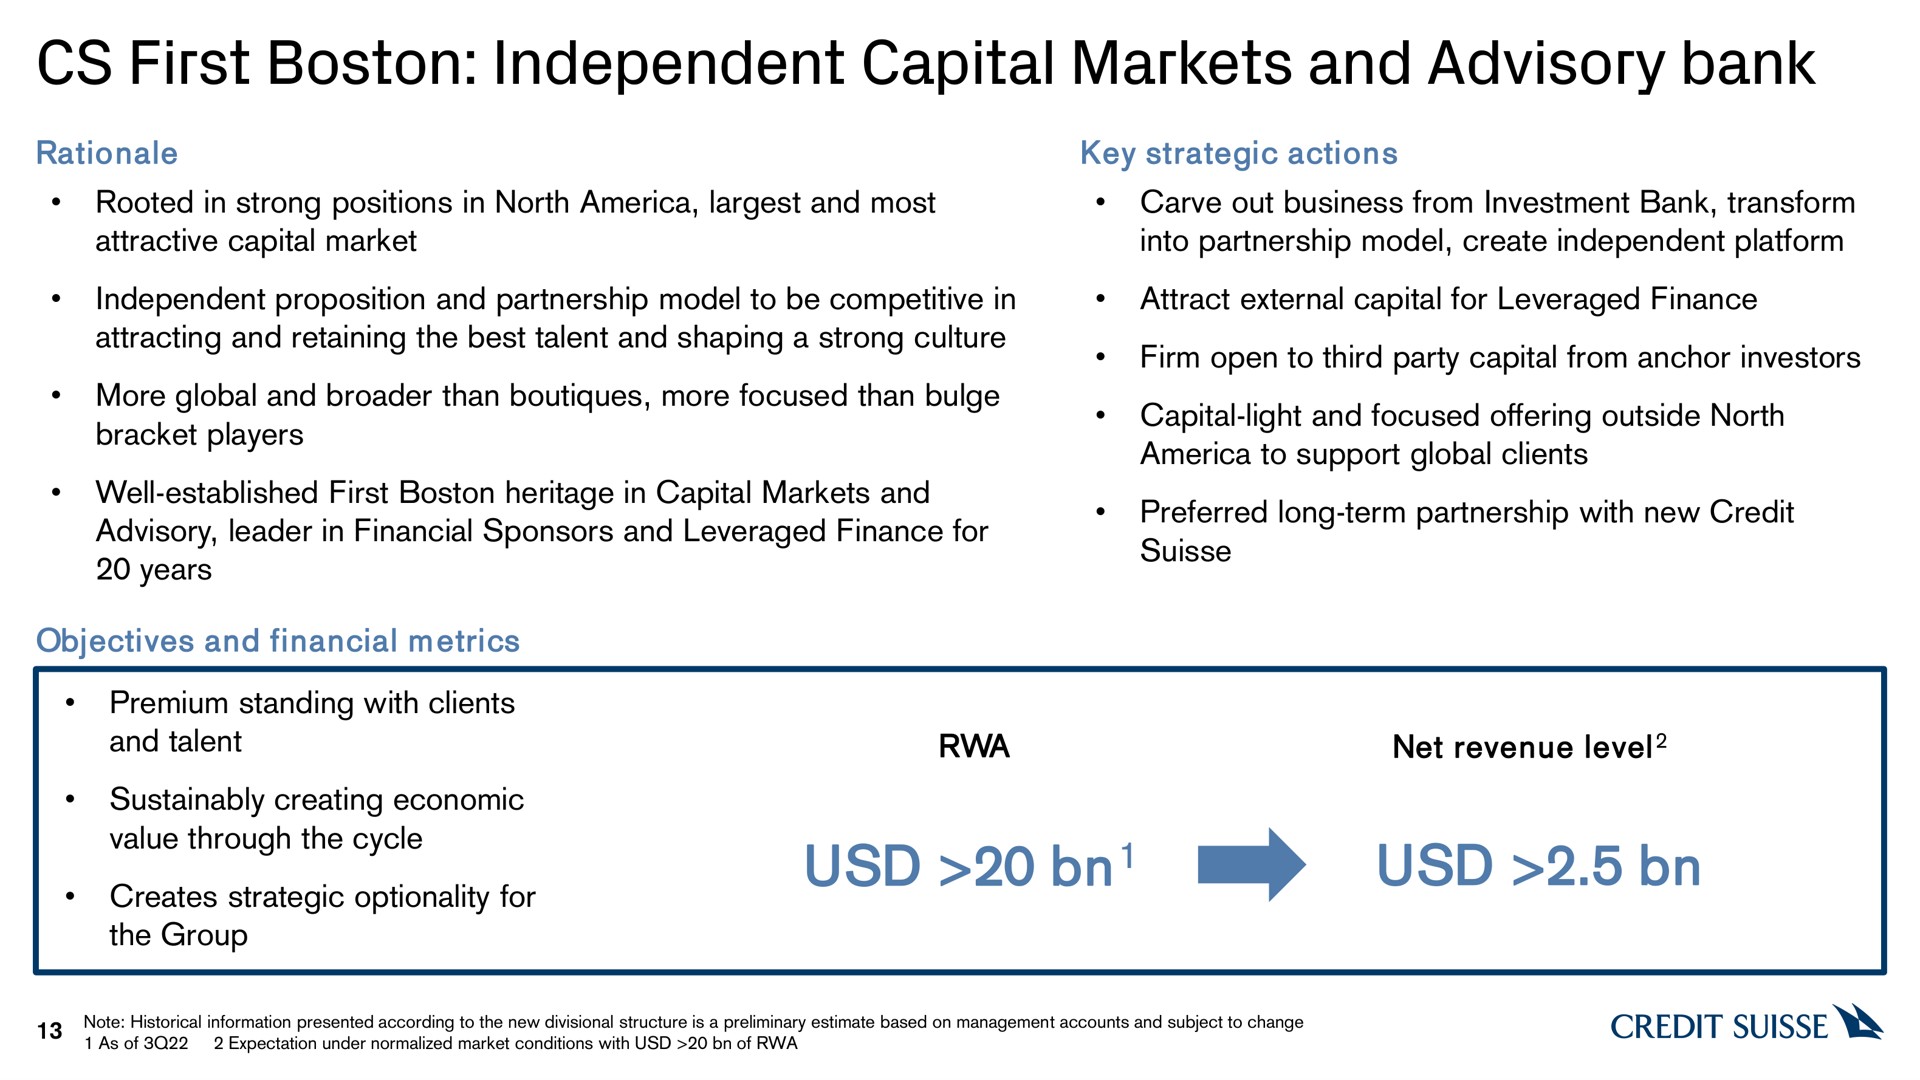 first boston independent capital markets and advisory bank | Credit Suisse